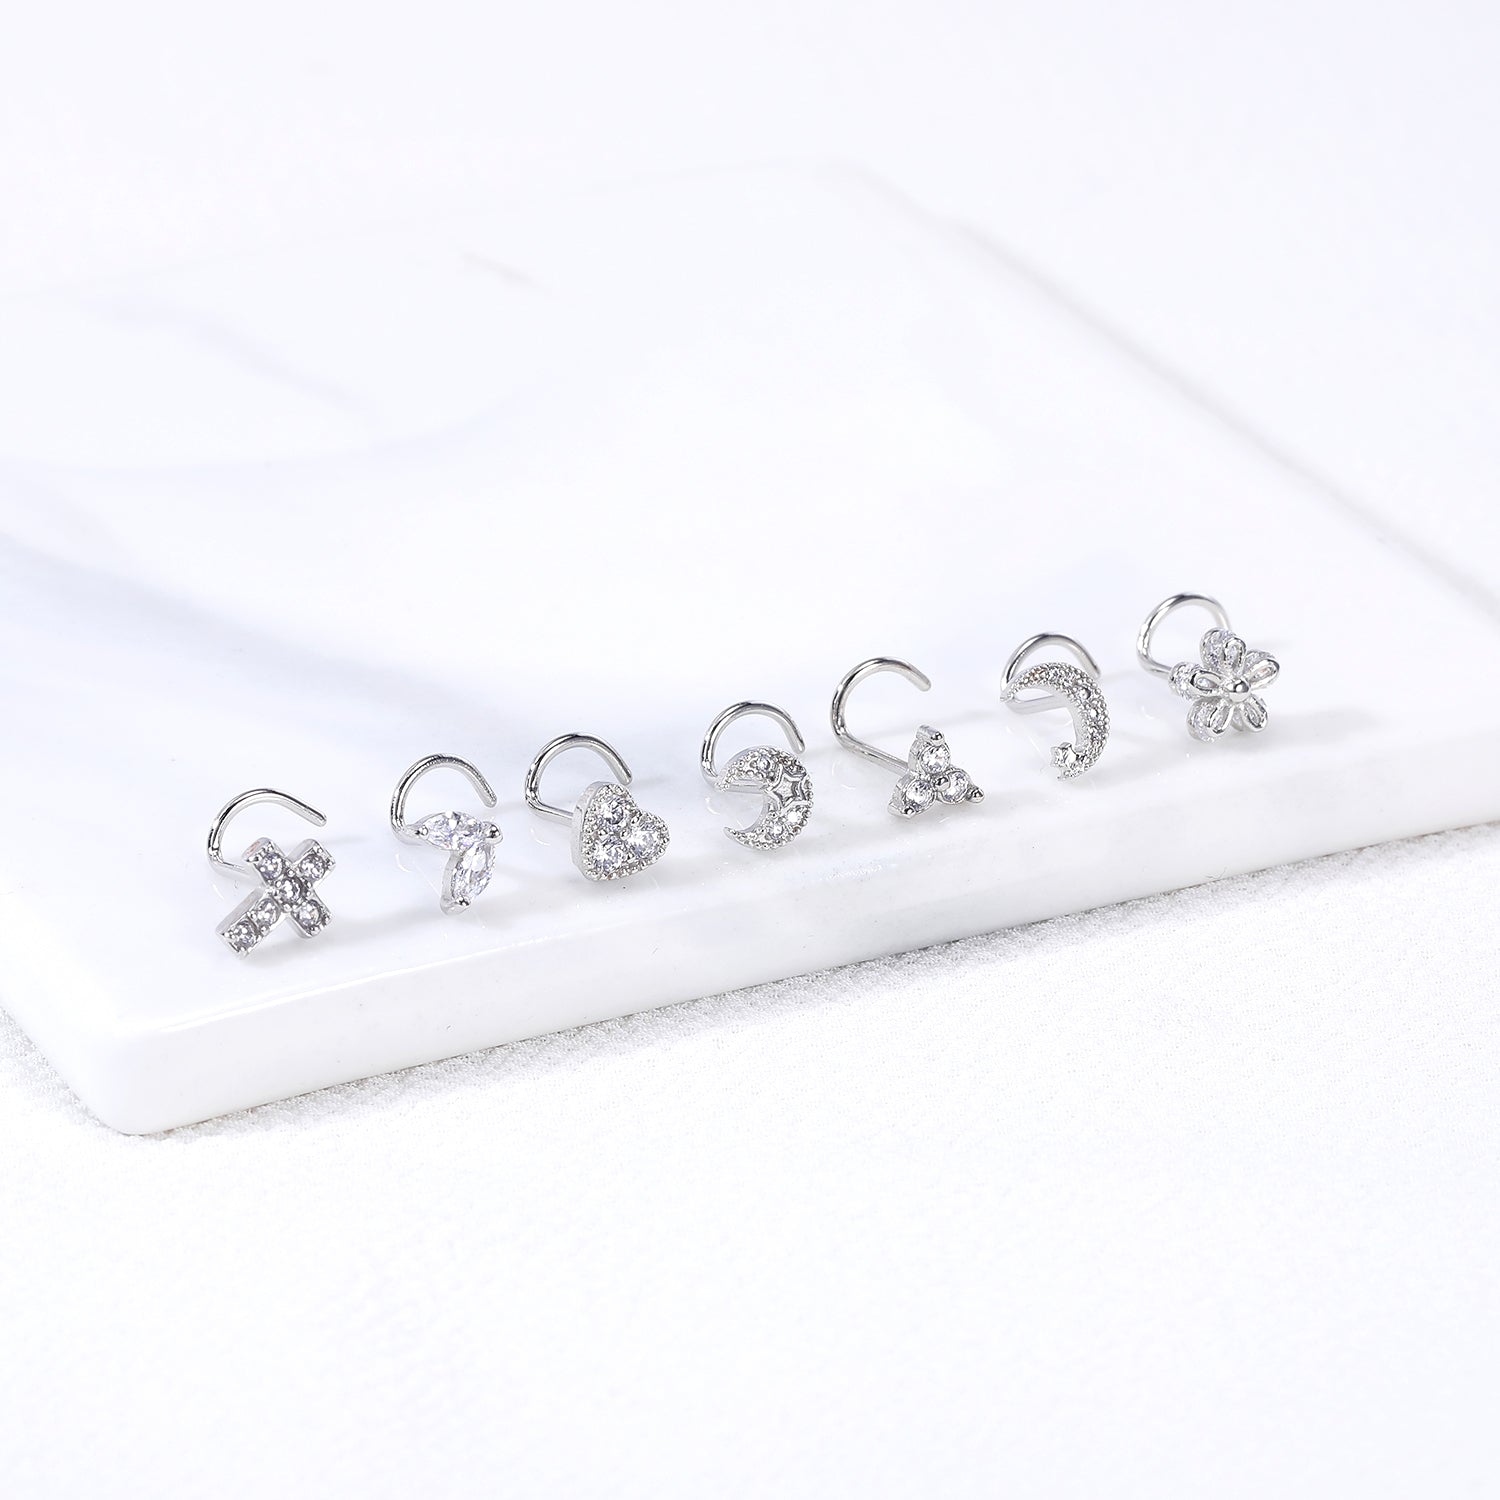 20G-Heart-White-Crystal-Nose-Studs-Piercing-Crokscrew-Nose-Rings-Stainless-Steel-Nostril-Piercing